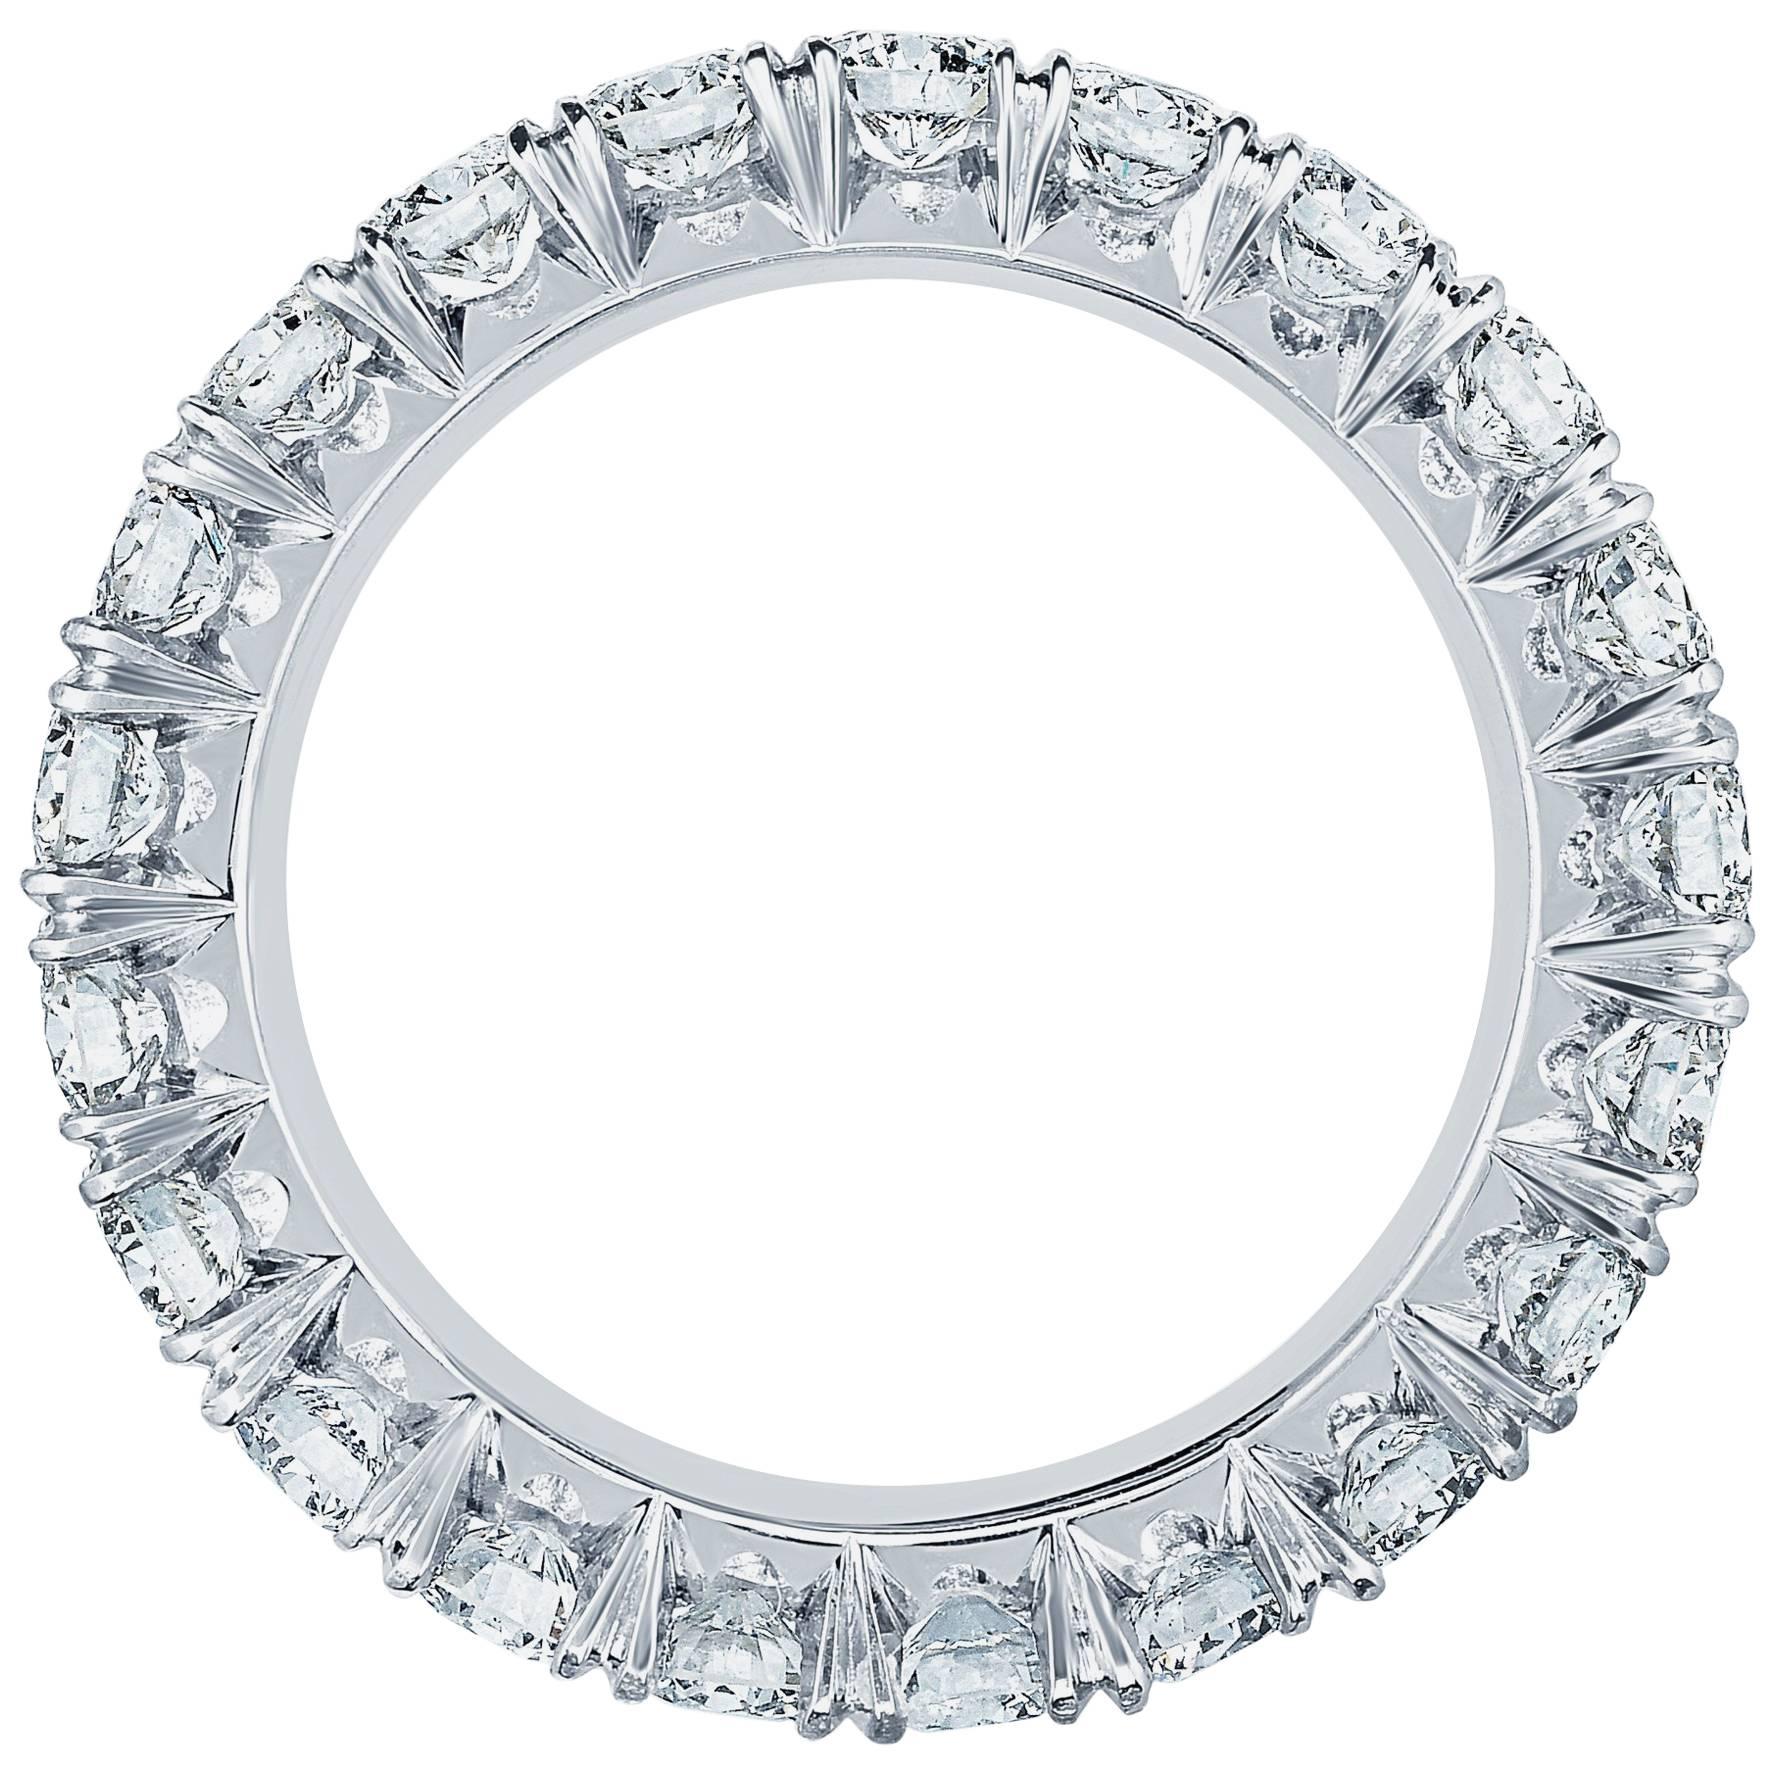 Marisa Perry Micro Pave Forevermark Ten Point Diamond Eternity Band in Platinum